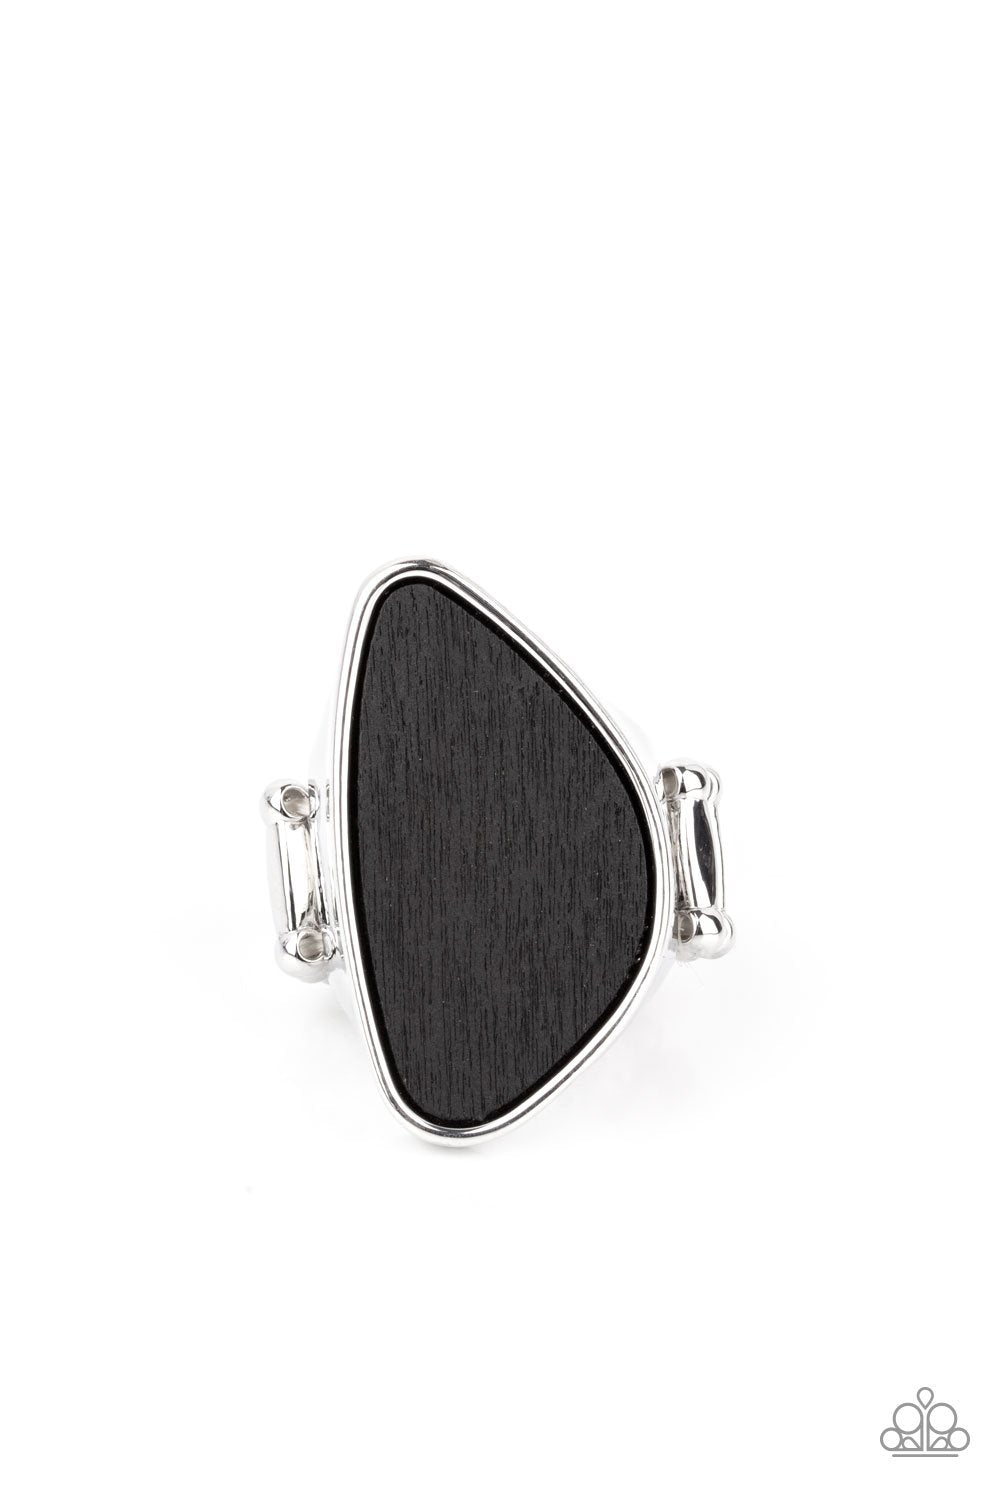 Perfectly Petrified Black Ring - Paparazzi Accessories- lightbox - CarasShop.com - $5 Jewelry by Cara Jewels